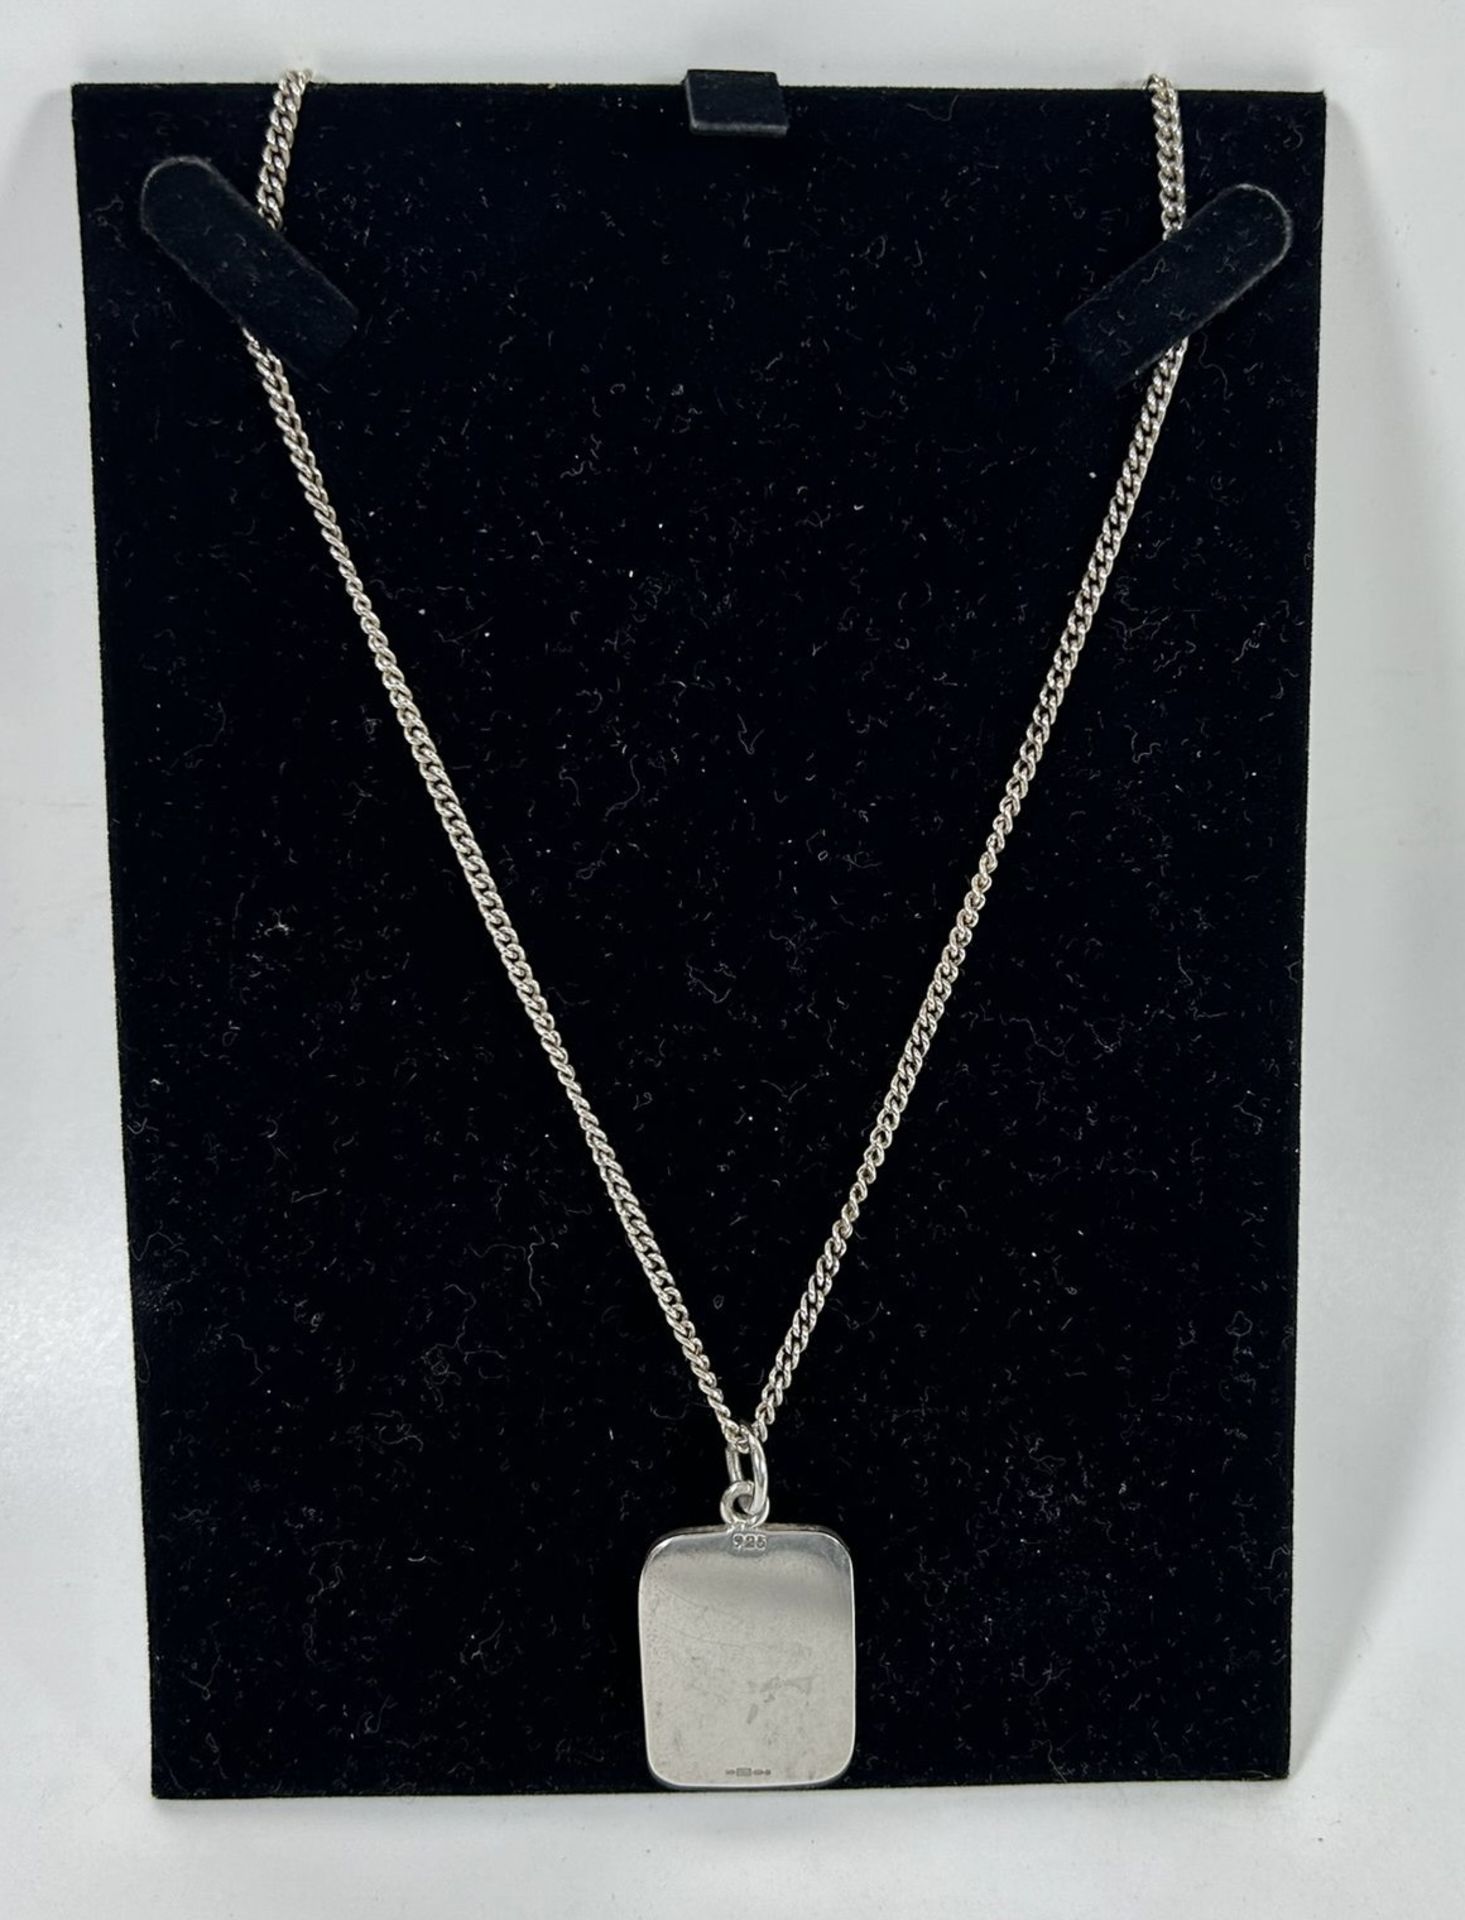 A .925 SILVER NECKLACE WITH TAG PENDANT, 18" CHAIN LENGTH